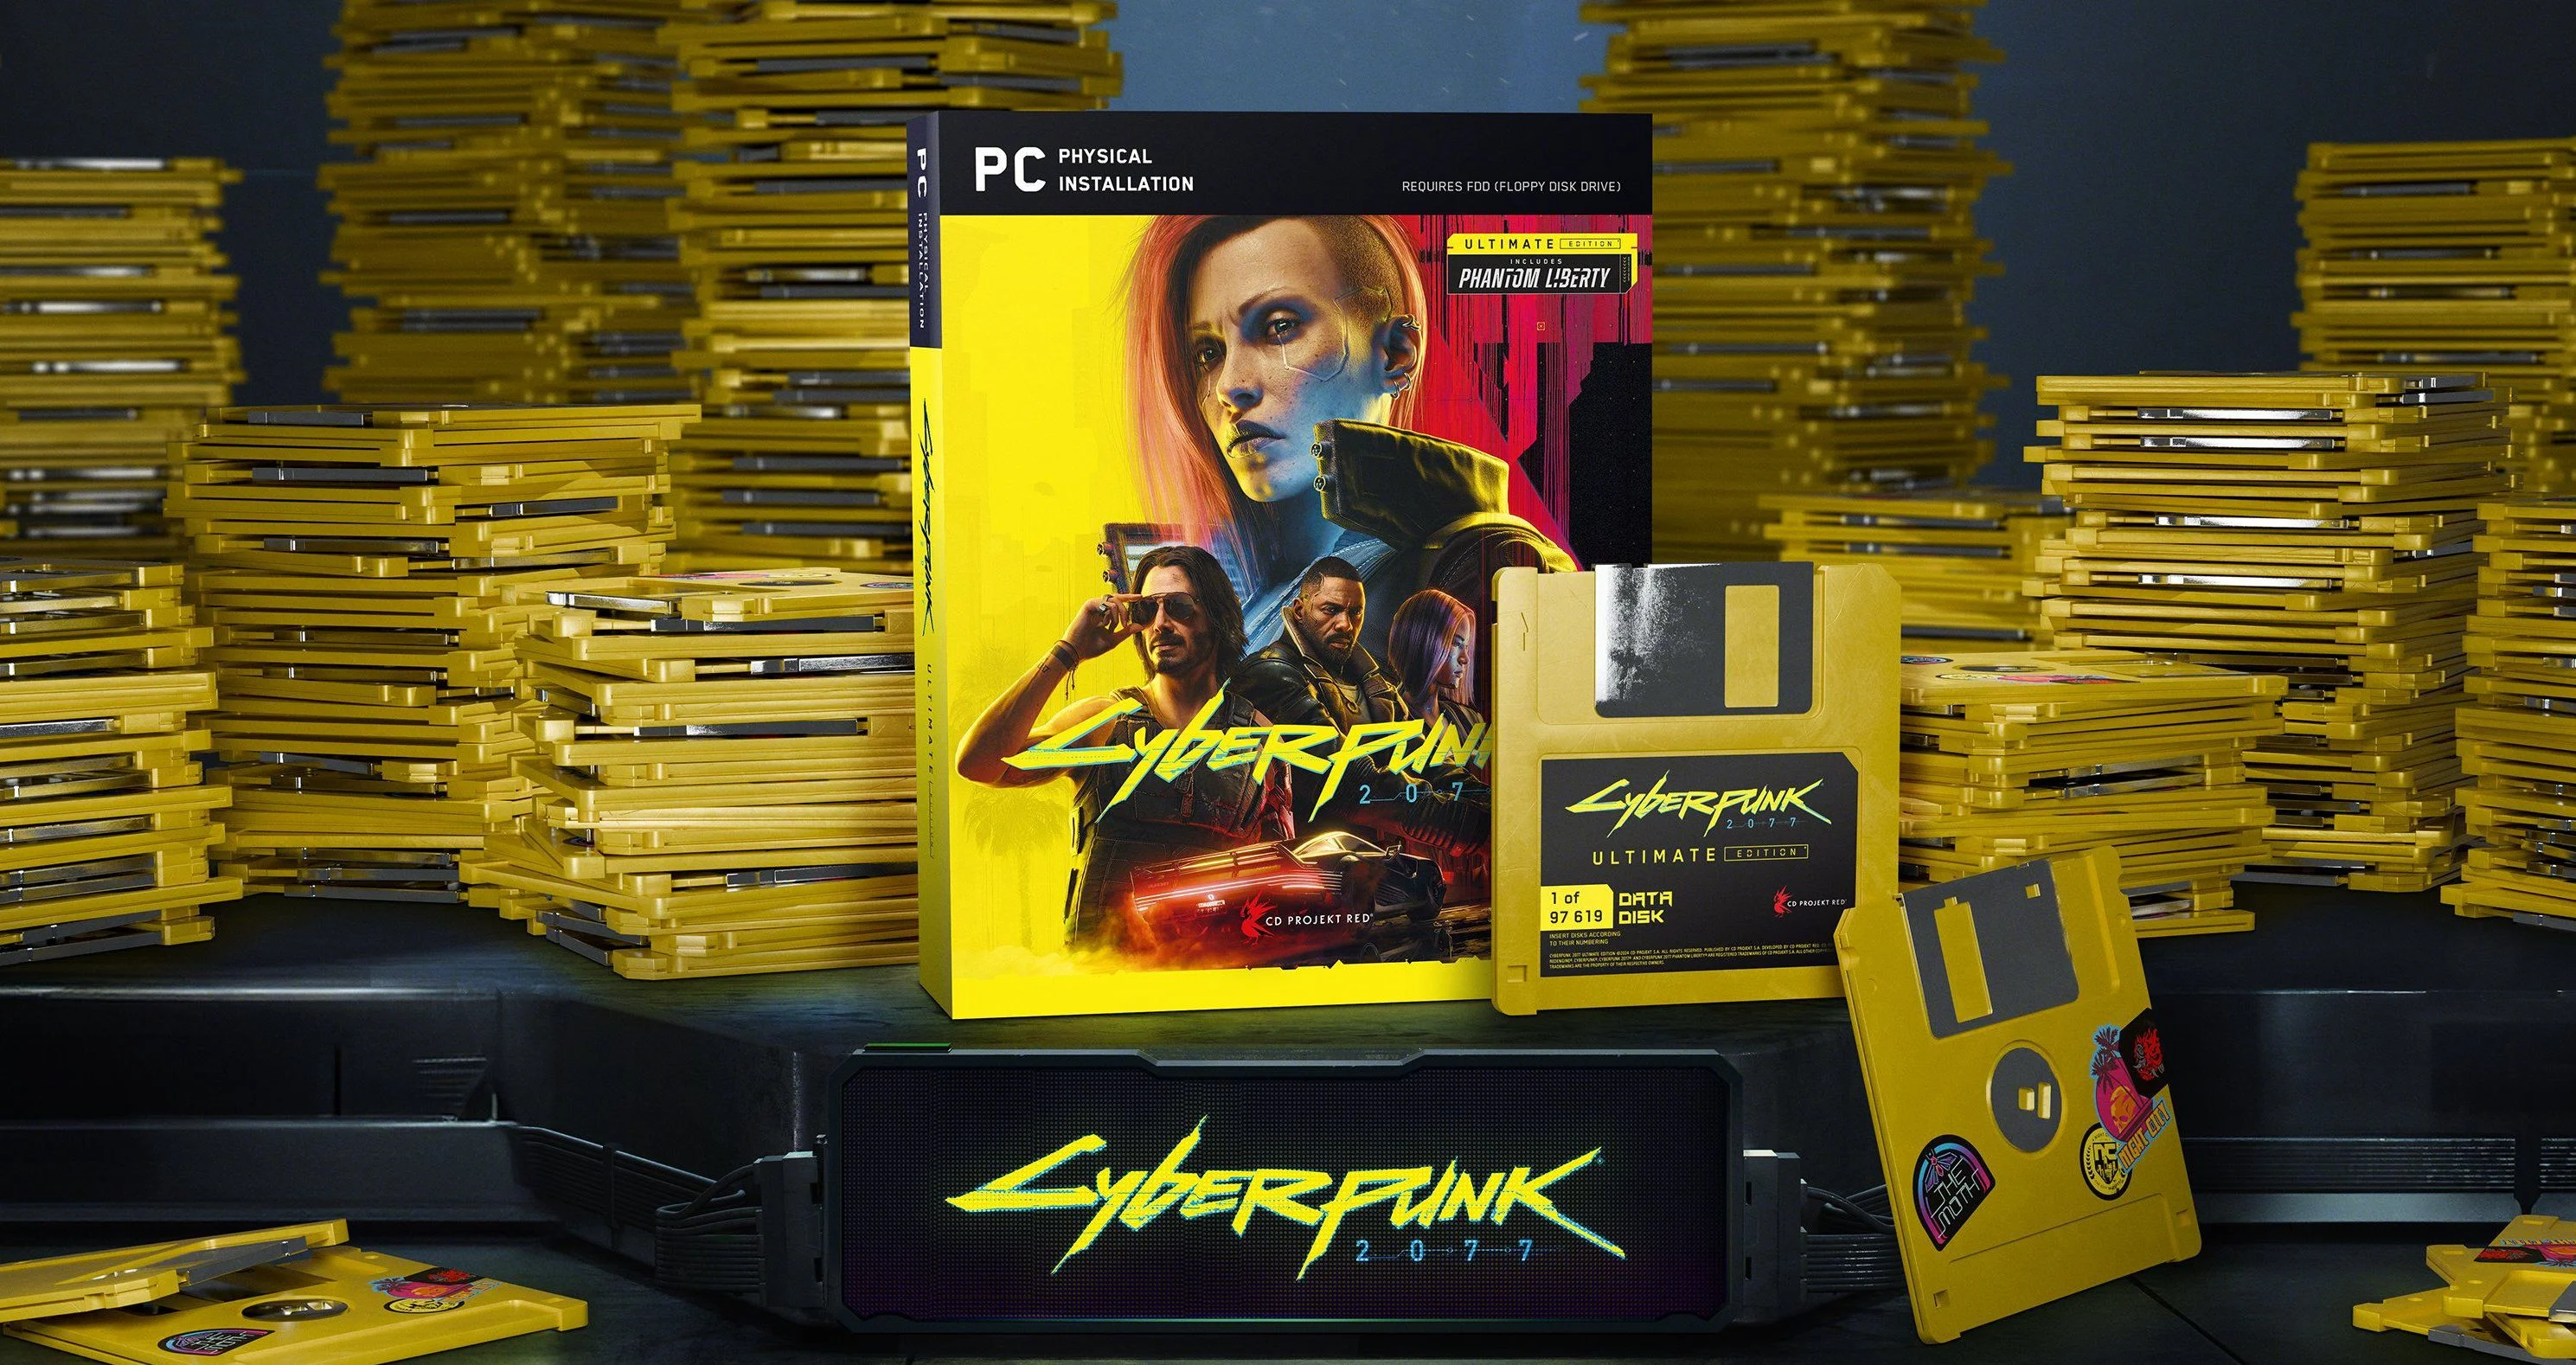 In honor of April 1, the developers have released a comic edition of Cyberpunk 2077